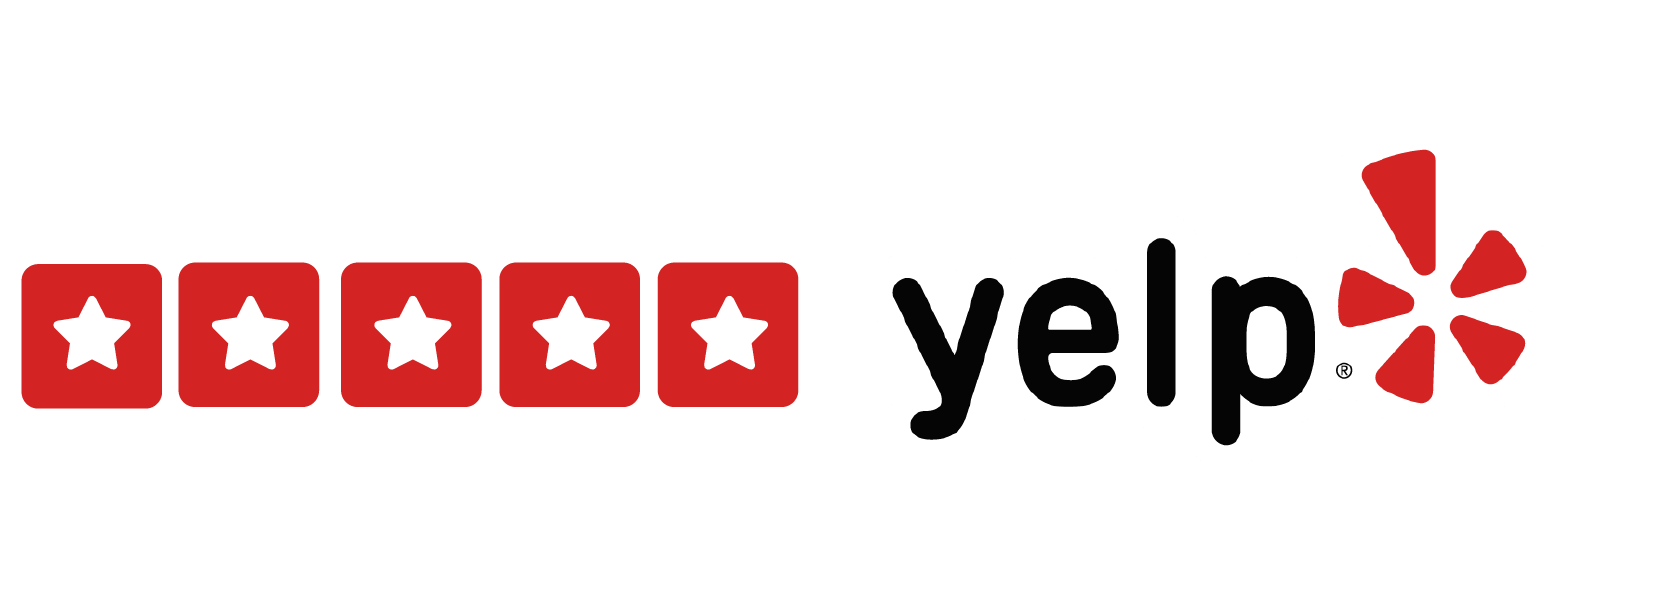 Albany SEO Services Company Featured on Yelp